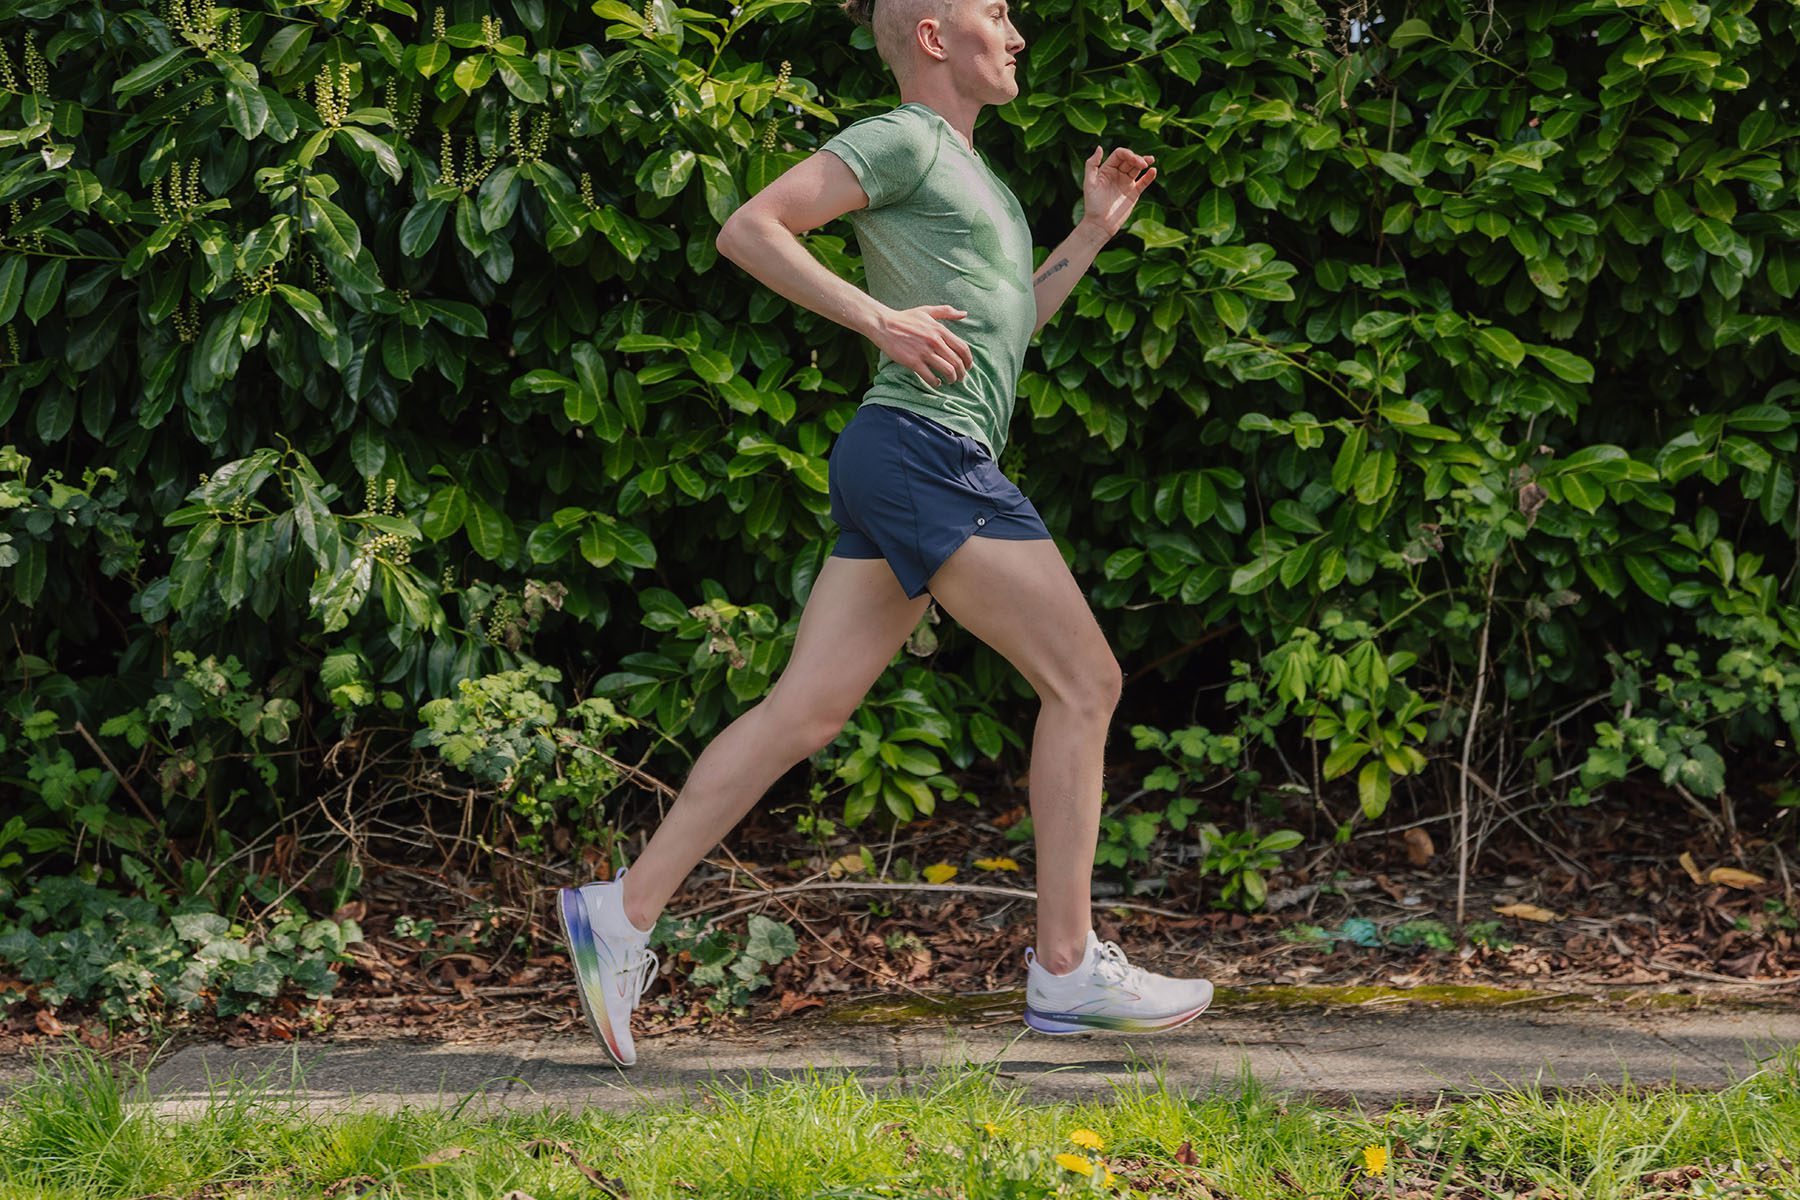 Jake Fedorowski, a nonbinary runner in green shirt and blue shorts